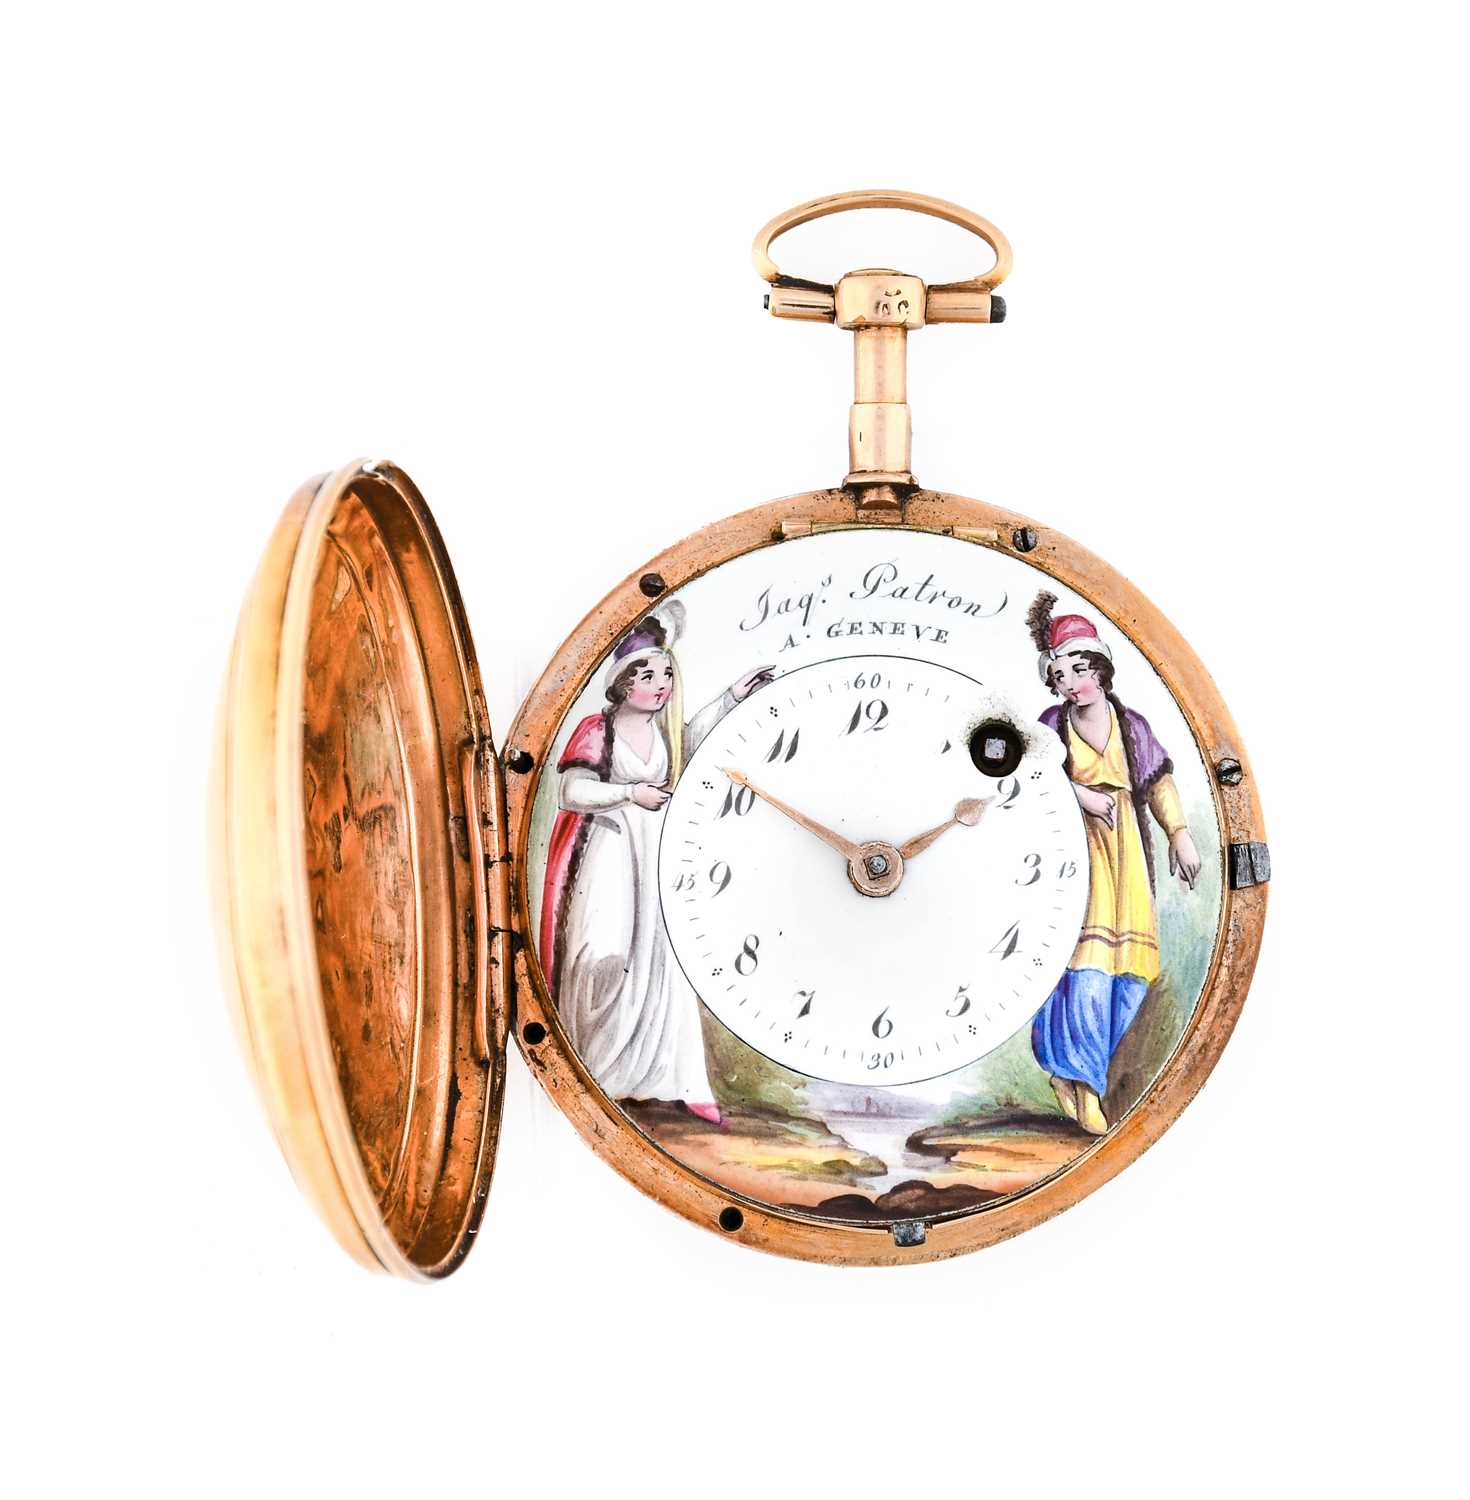 Patron: A Swiss Consular Cased Painted Dial Verge Pocket Watch, signed Jaqs Patron, A Geneve,